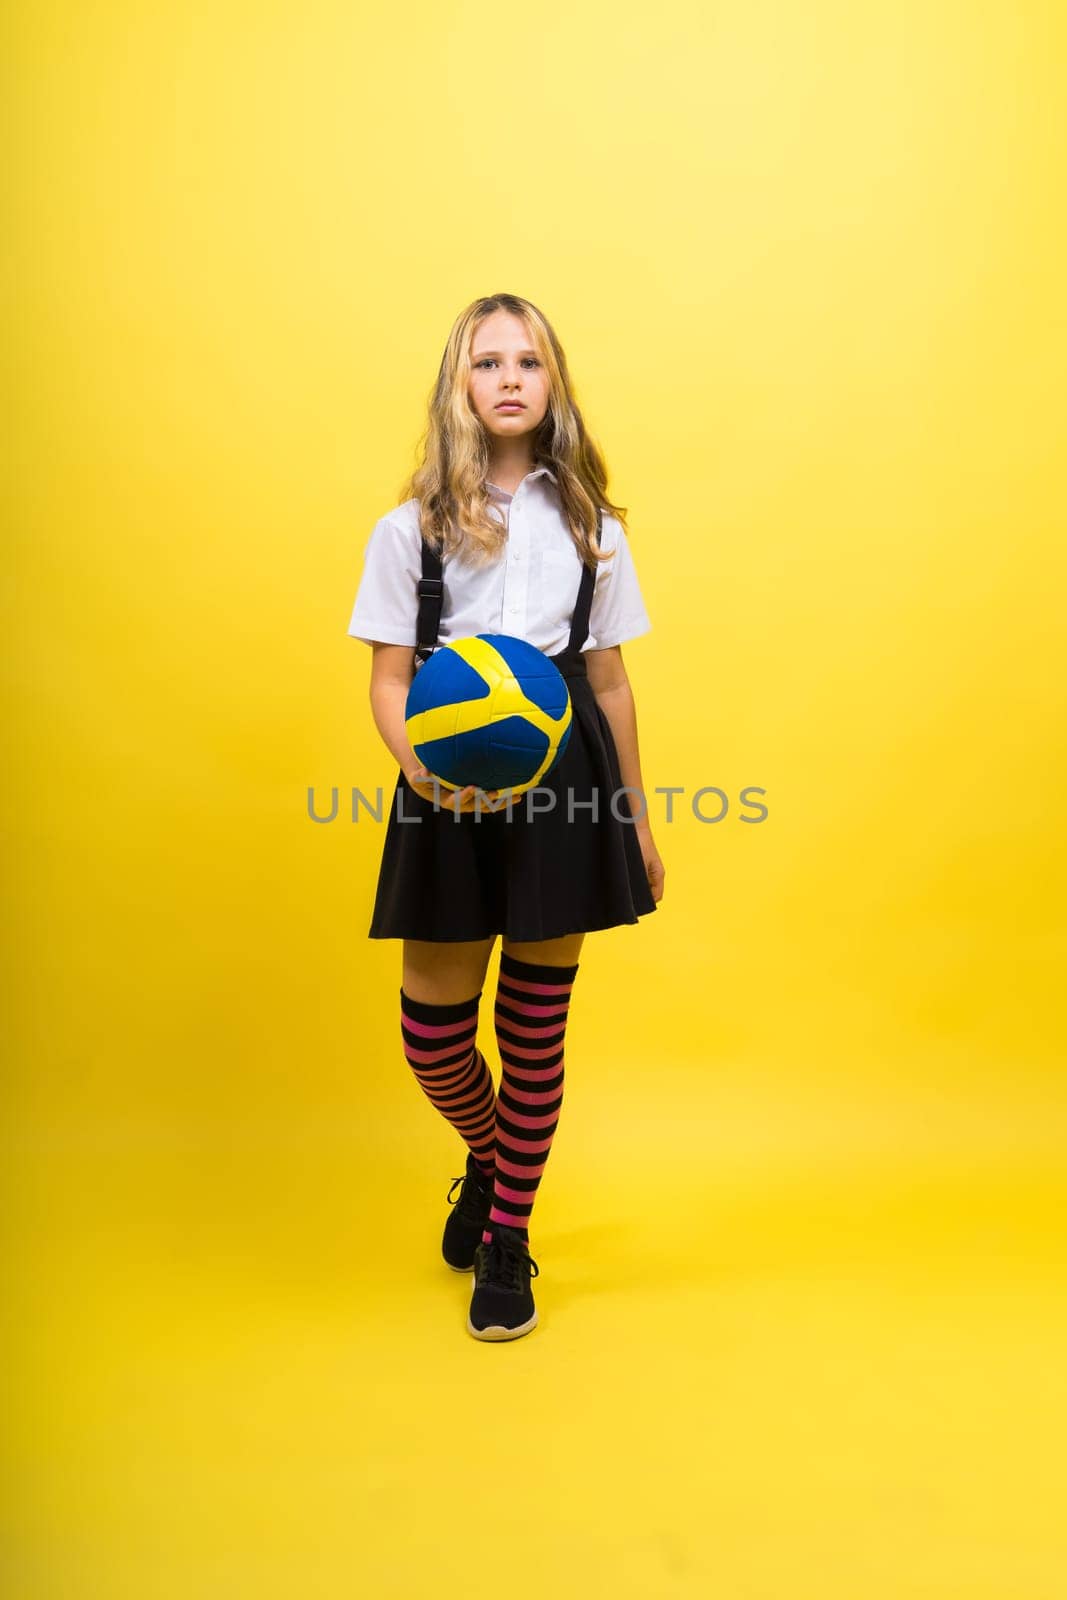 A teenager girl holds volleyball ball in hand and smiles on a red yellow background. Studio photo. by Zelenin